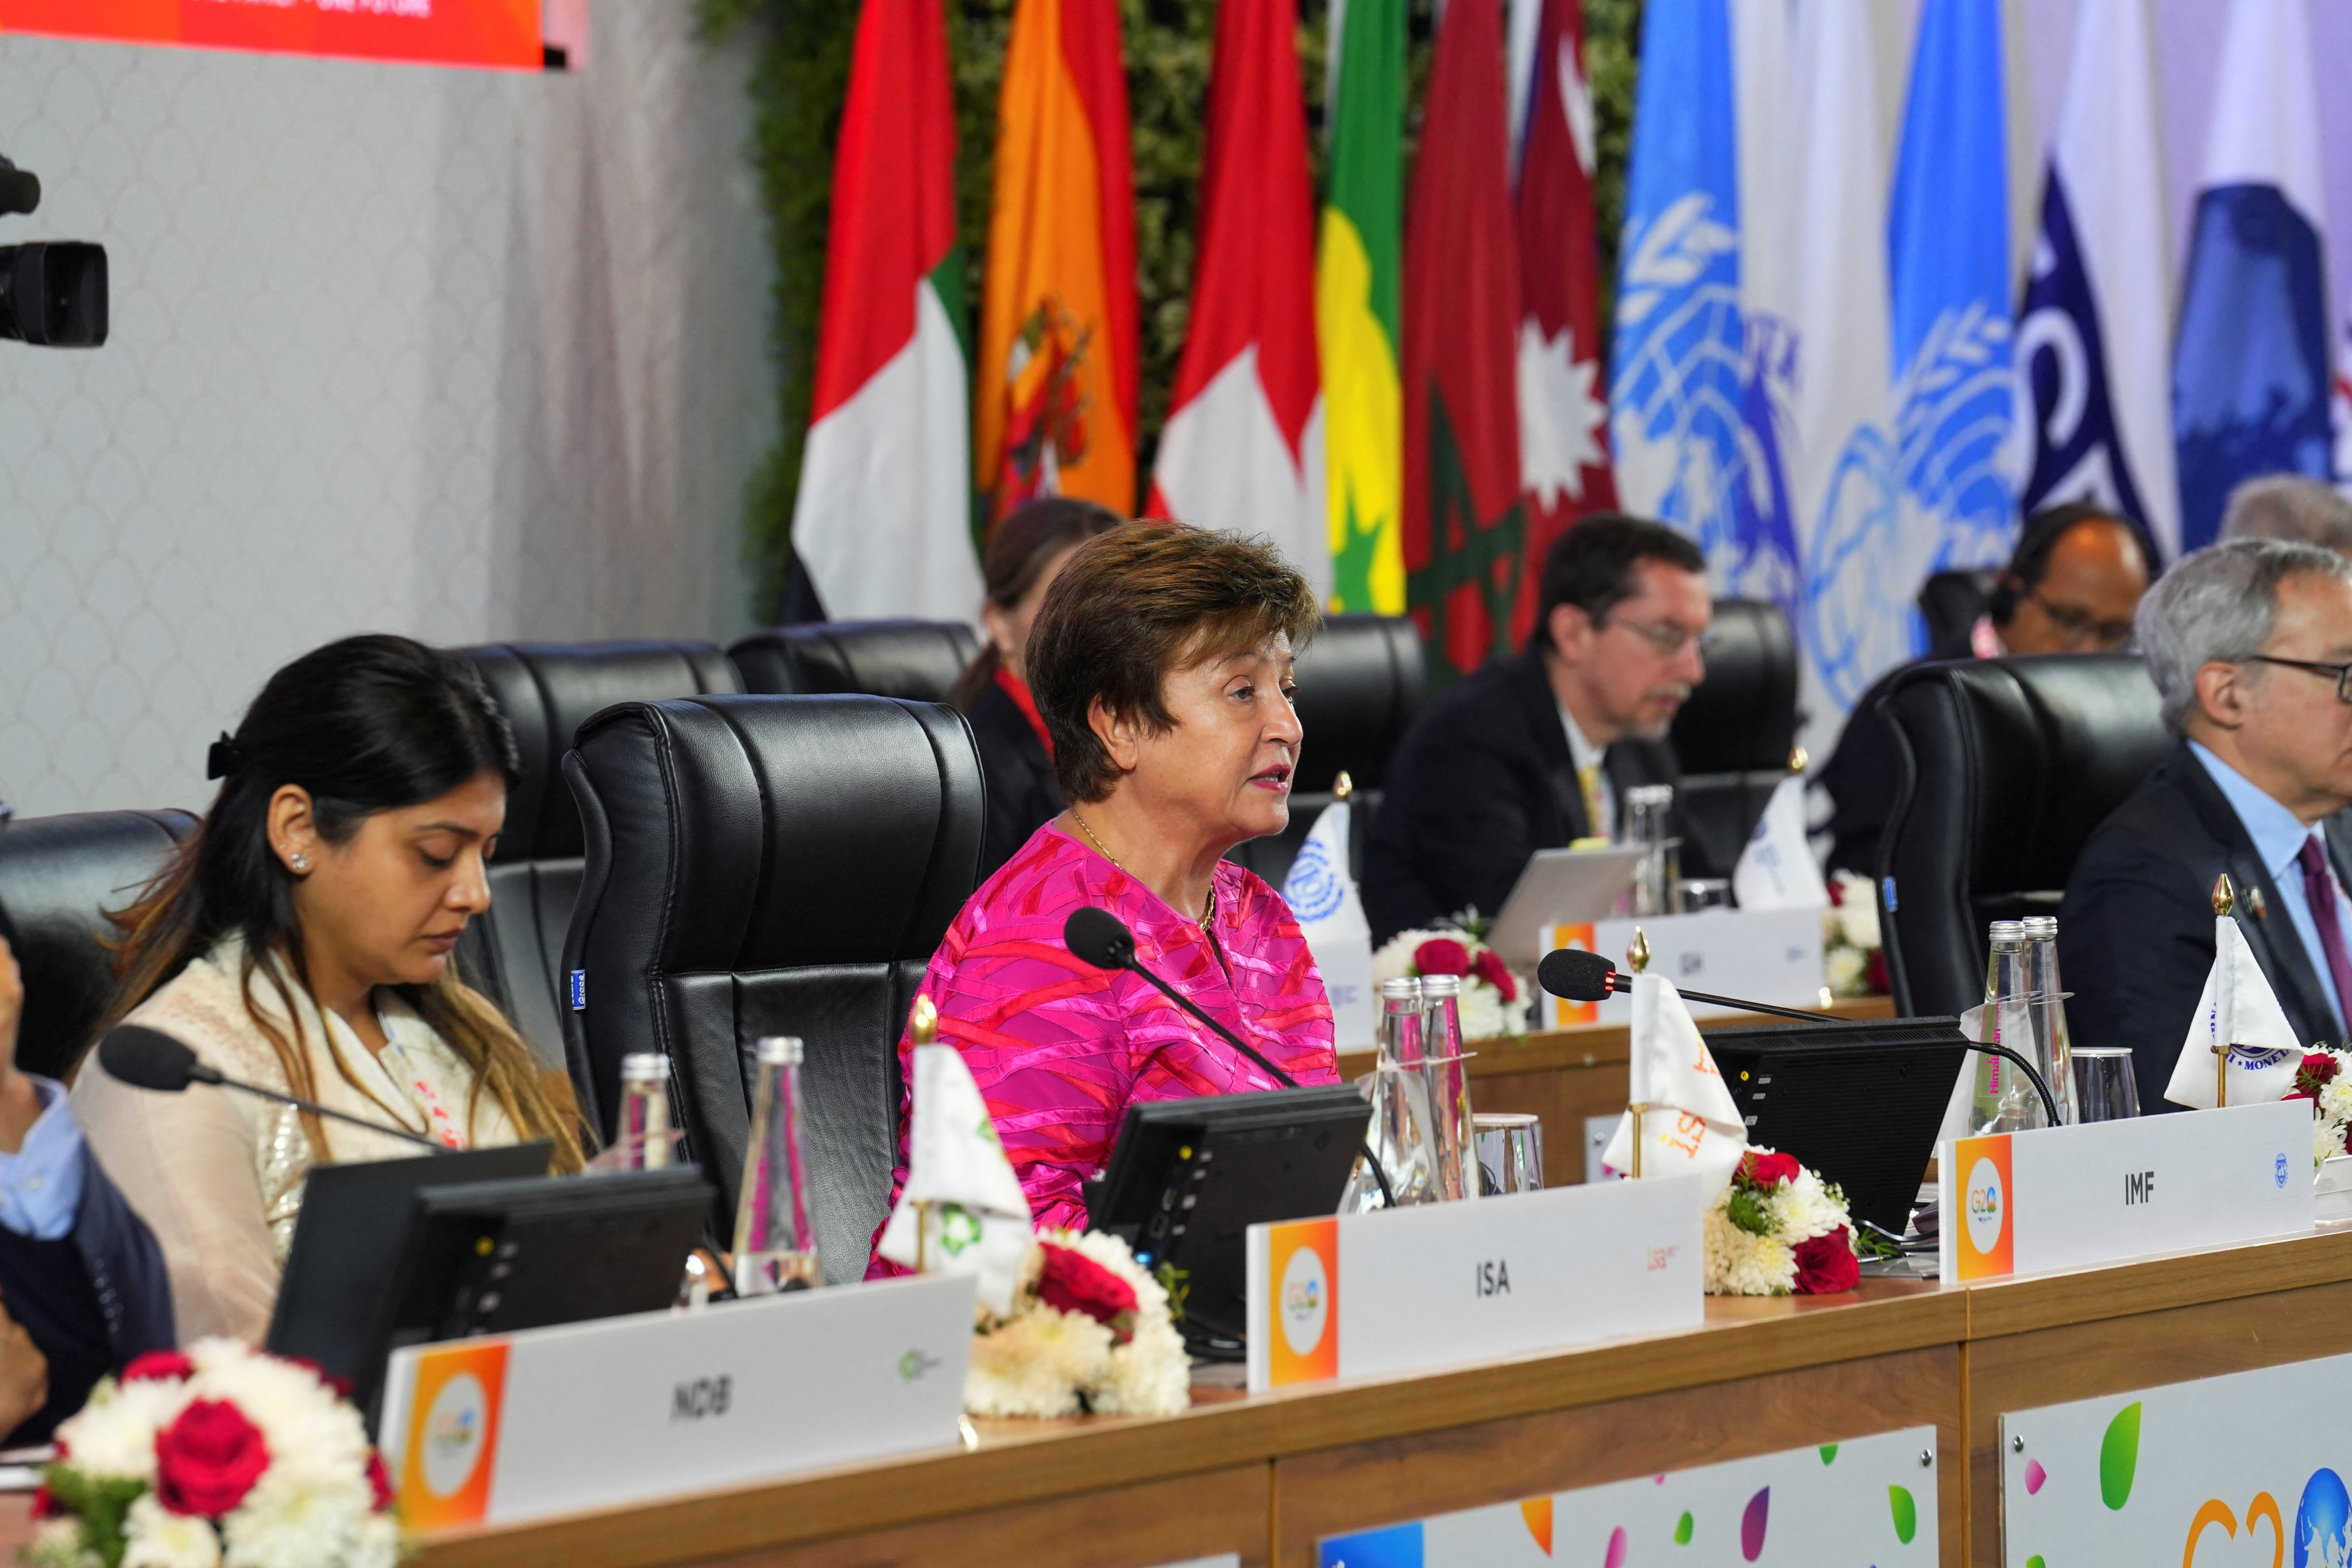 IMF Managing Director Kristalina Georgieva speaks during the G20 Finance Ministers and Central Bank Governors meeting on the outskirts of Bengaluru, India, on February 24, 2023. Photo: via Reuters